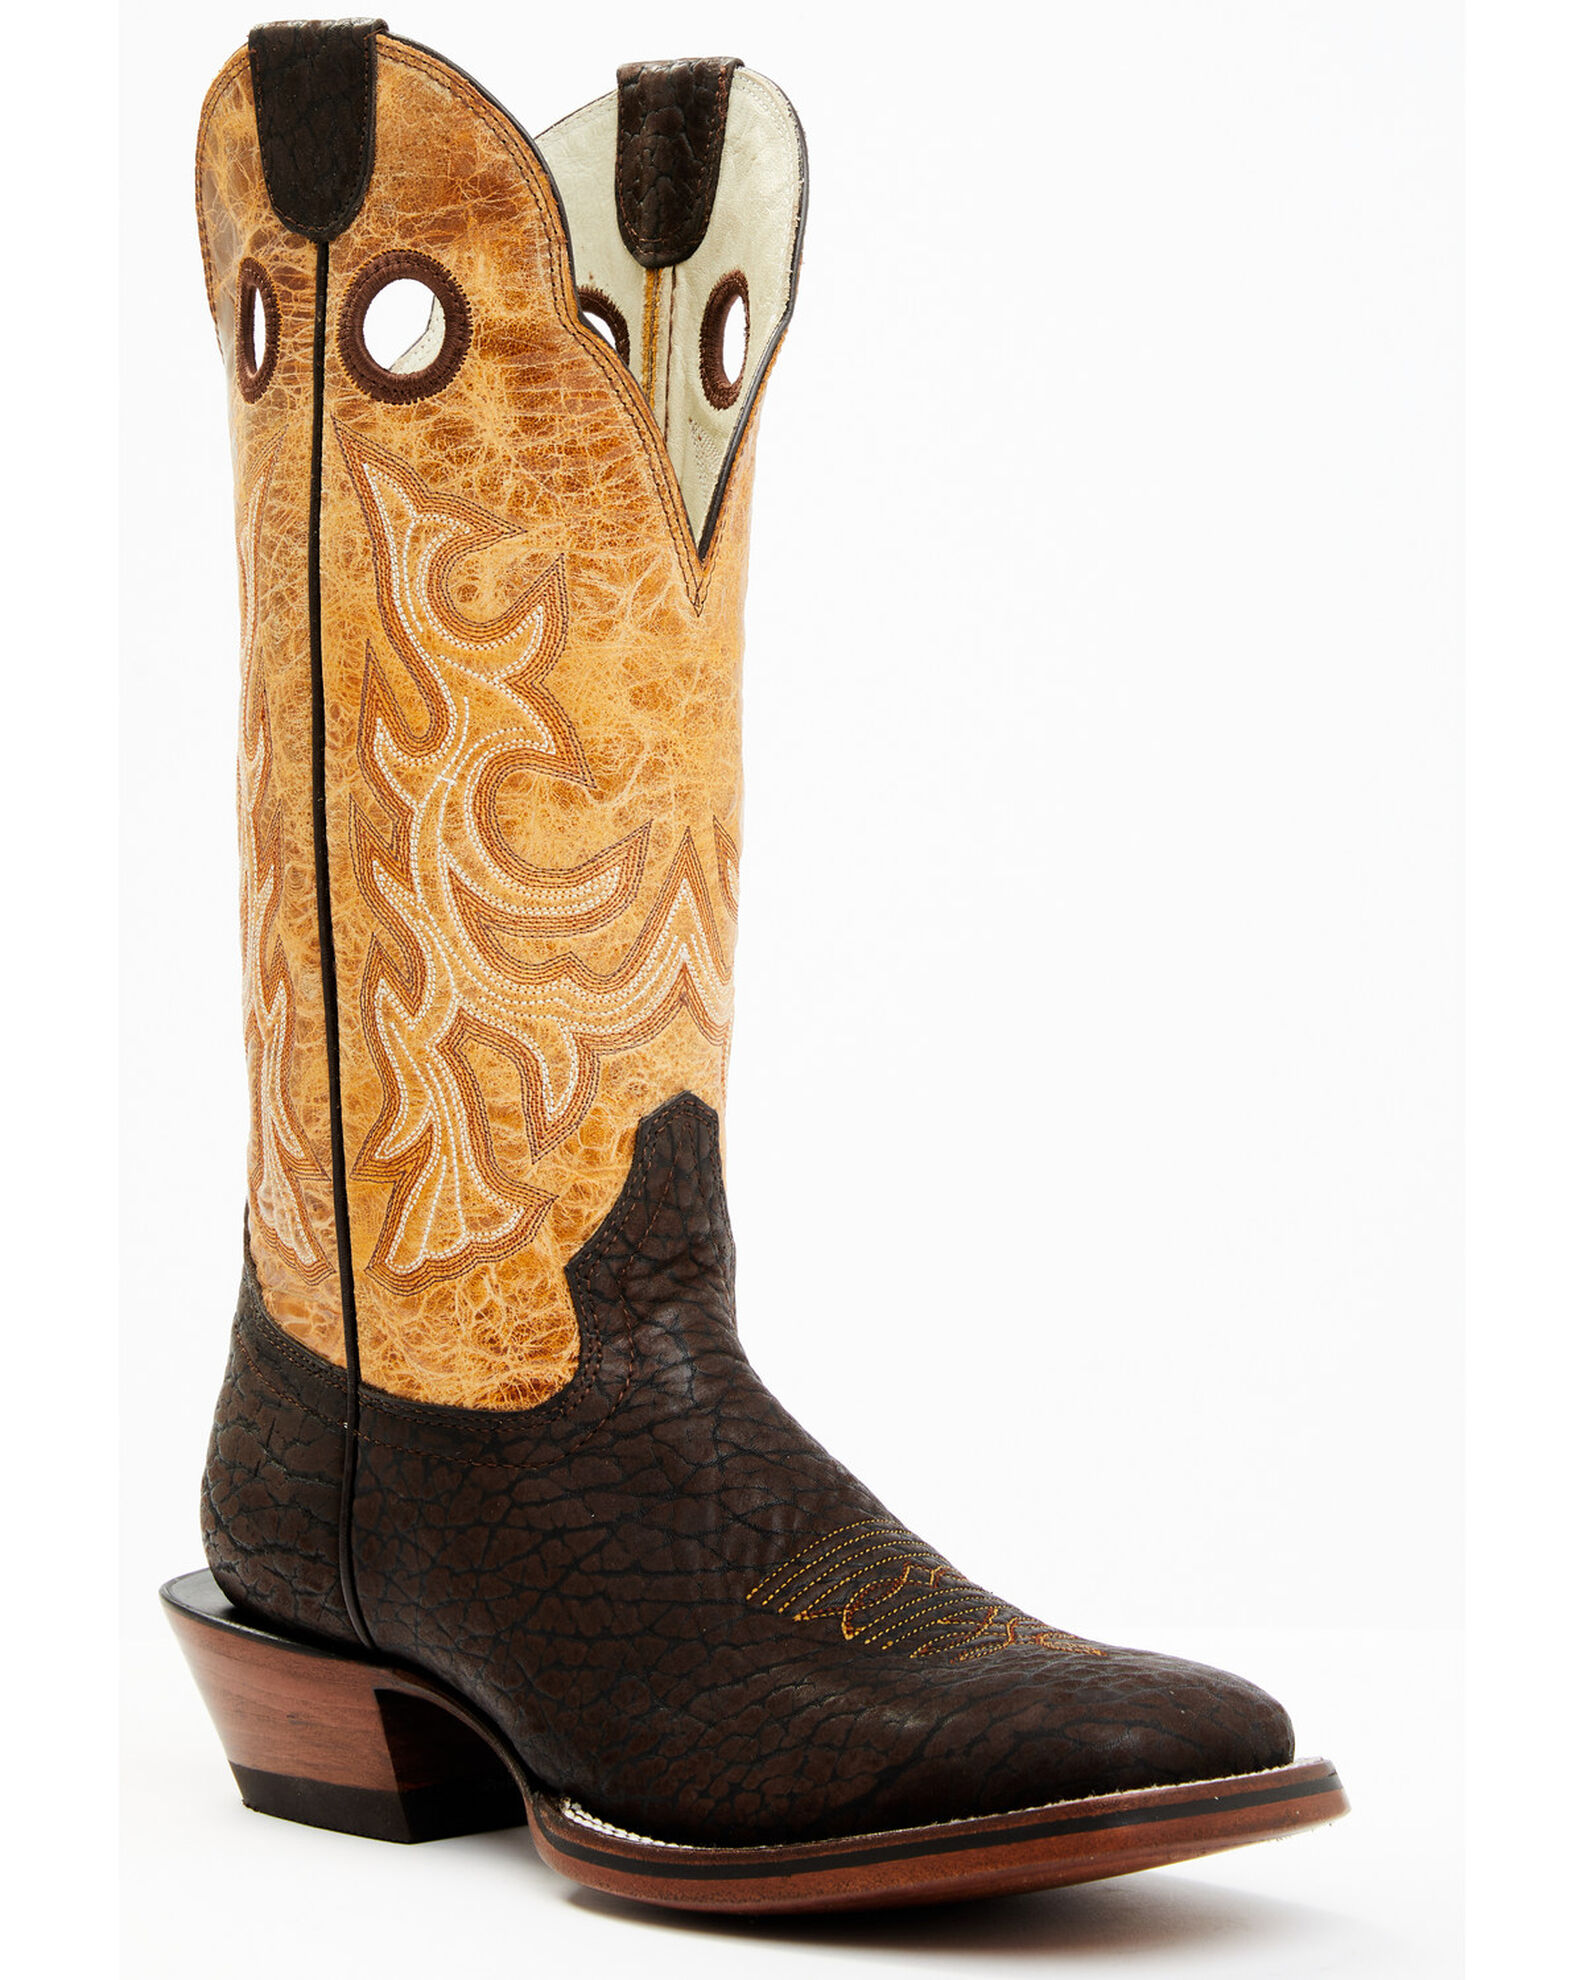 Hondo Boots Men's Roughout Western Boots - Broad Square Toe